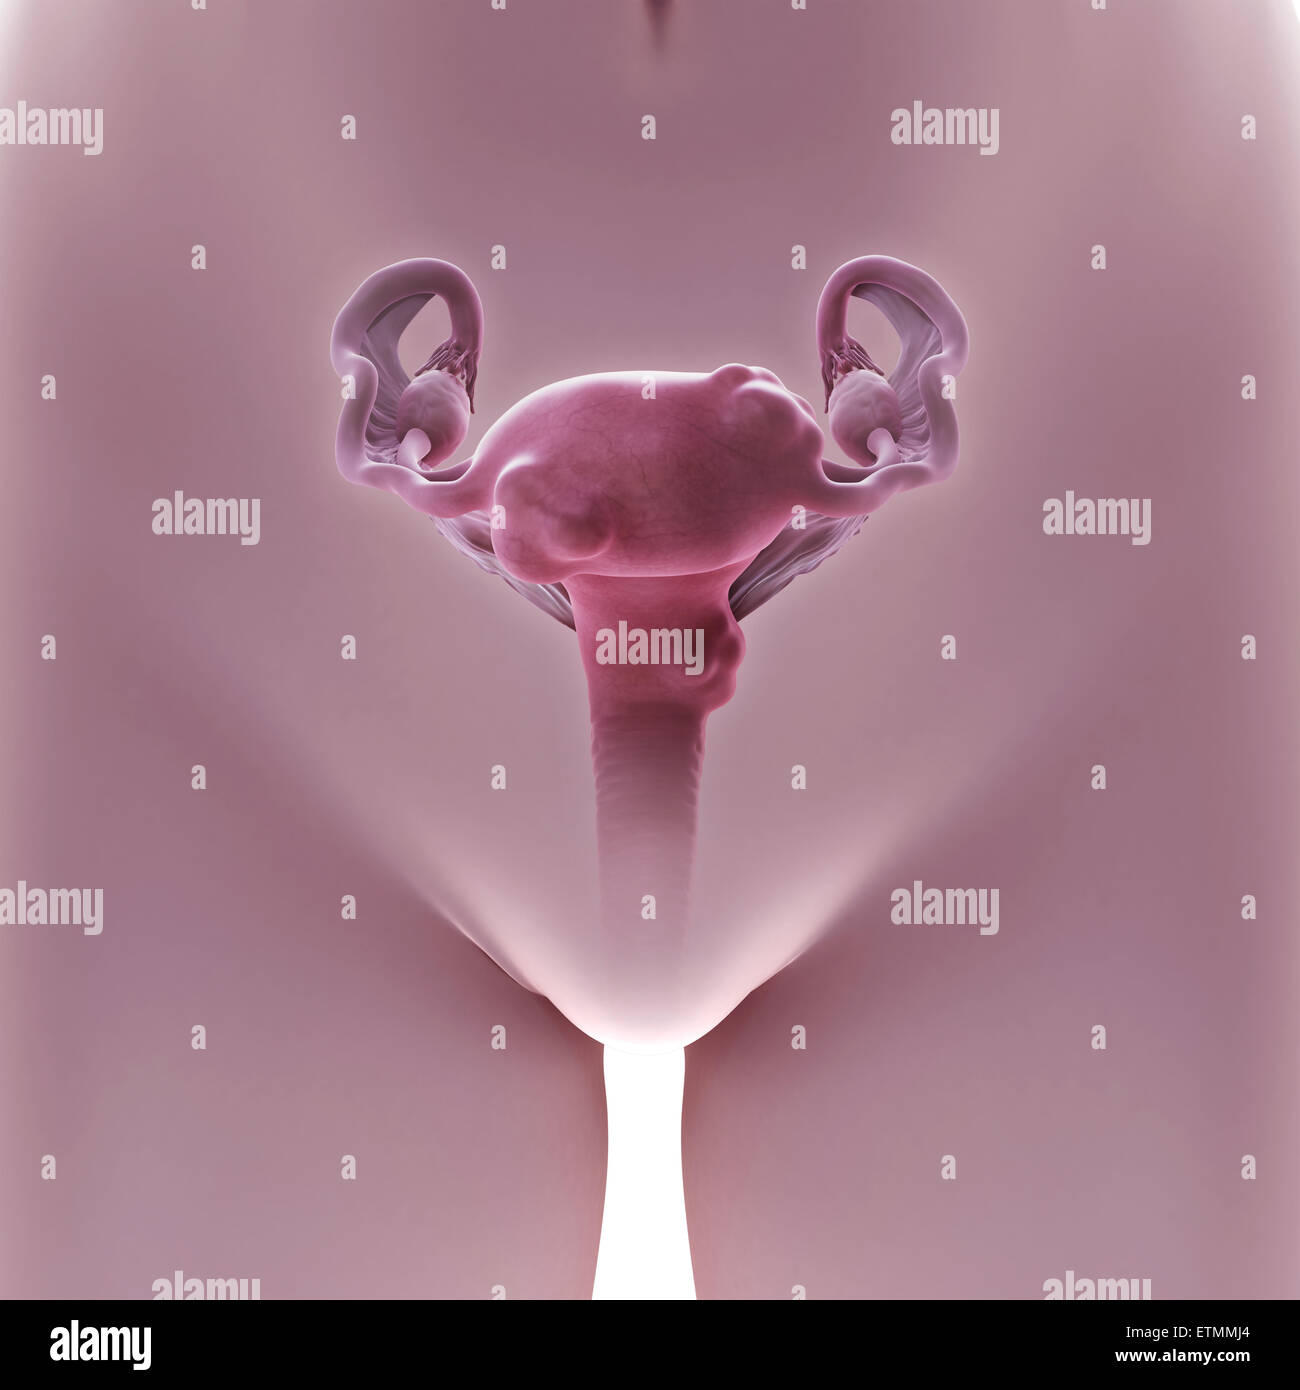 Illustration of a womb afflicted with uterine fibroids, benign tumors of the uterus. Stock Photo